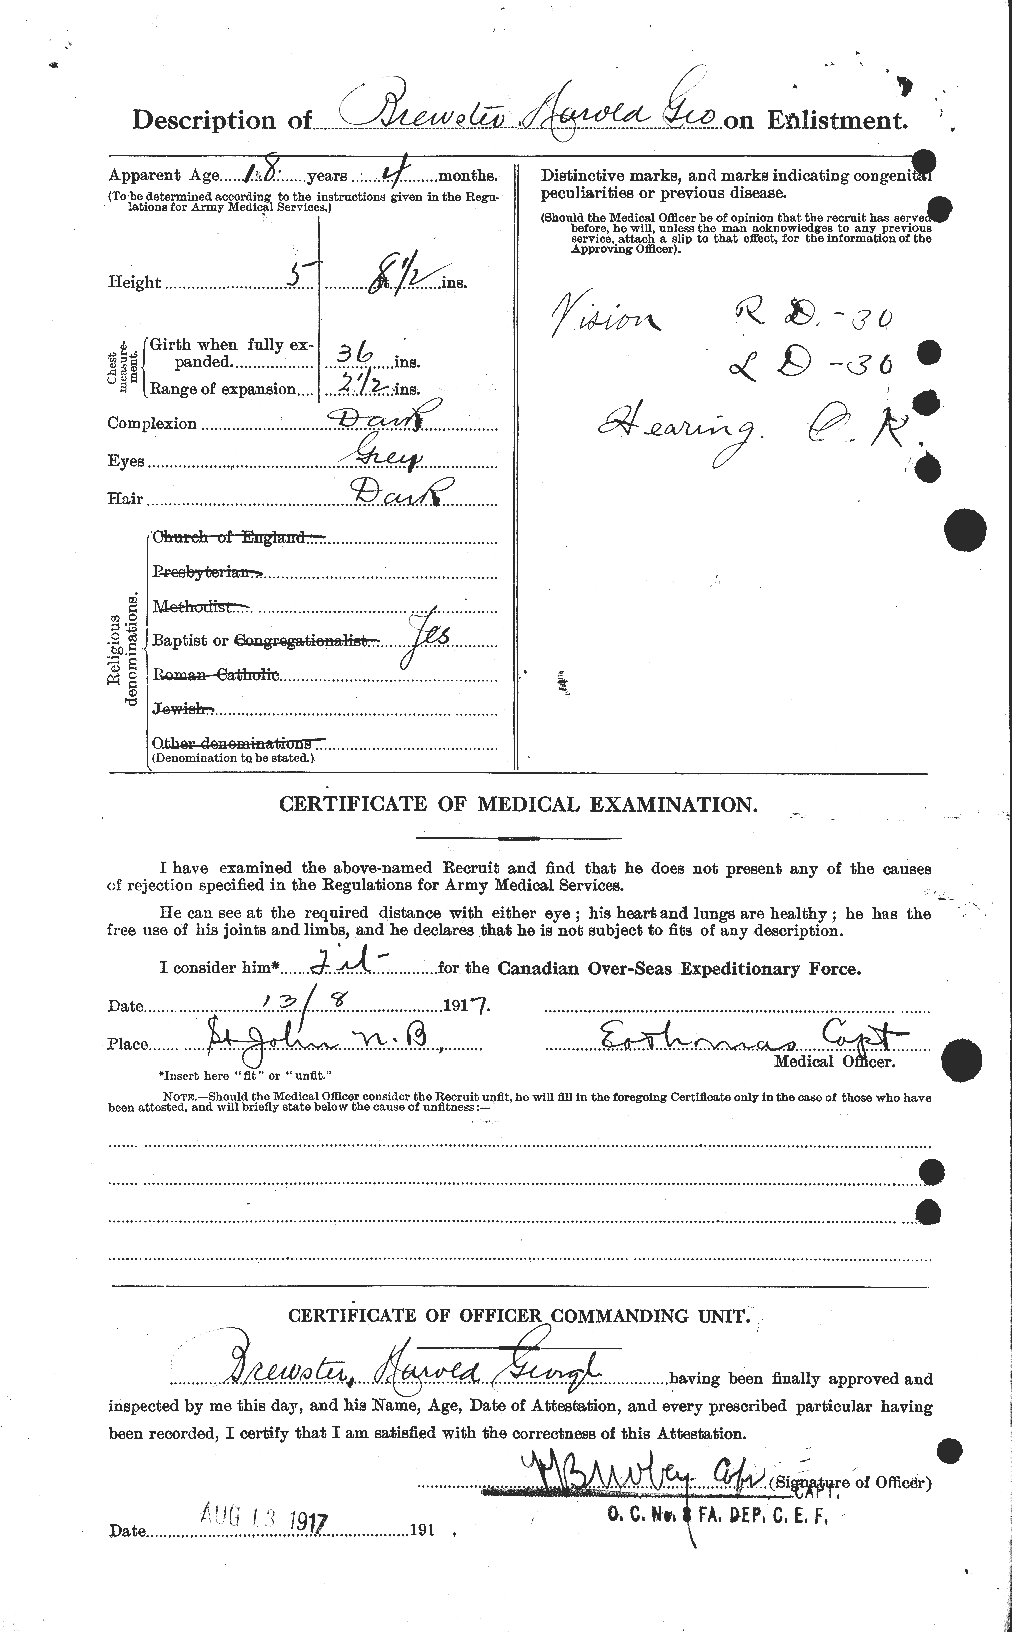 Personnel Records of the First World War - CEF 260879b